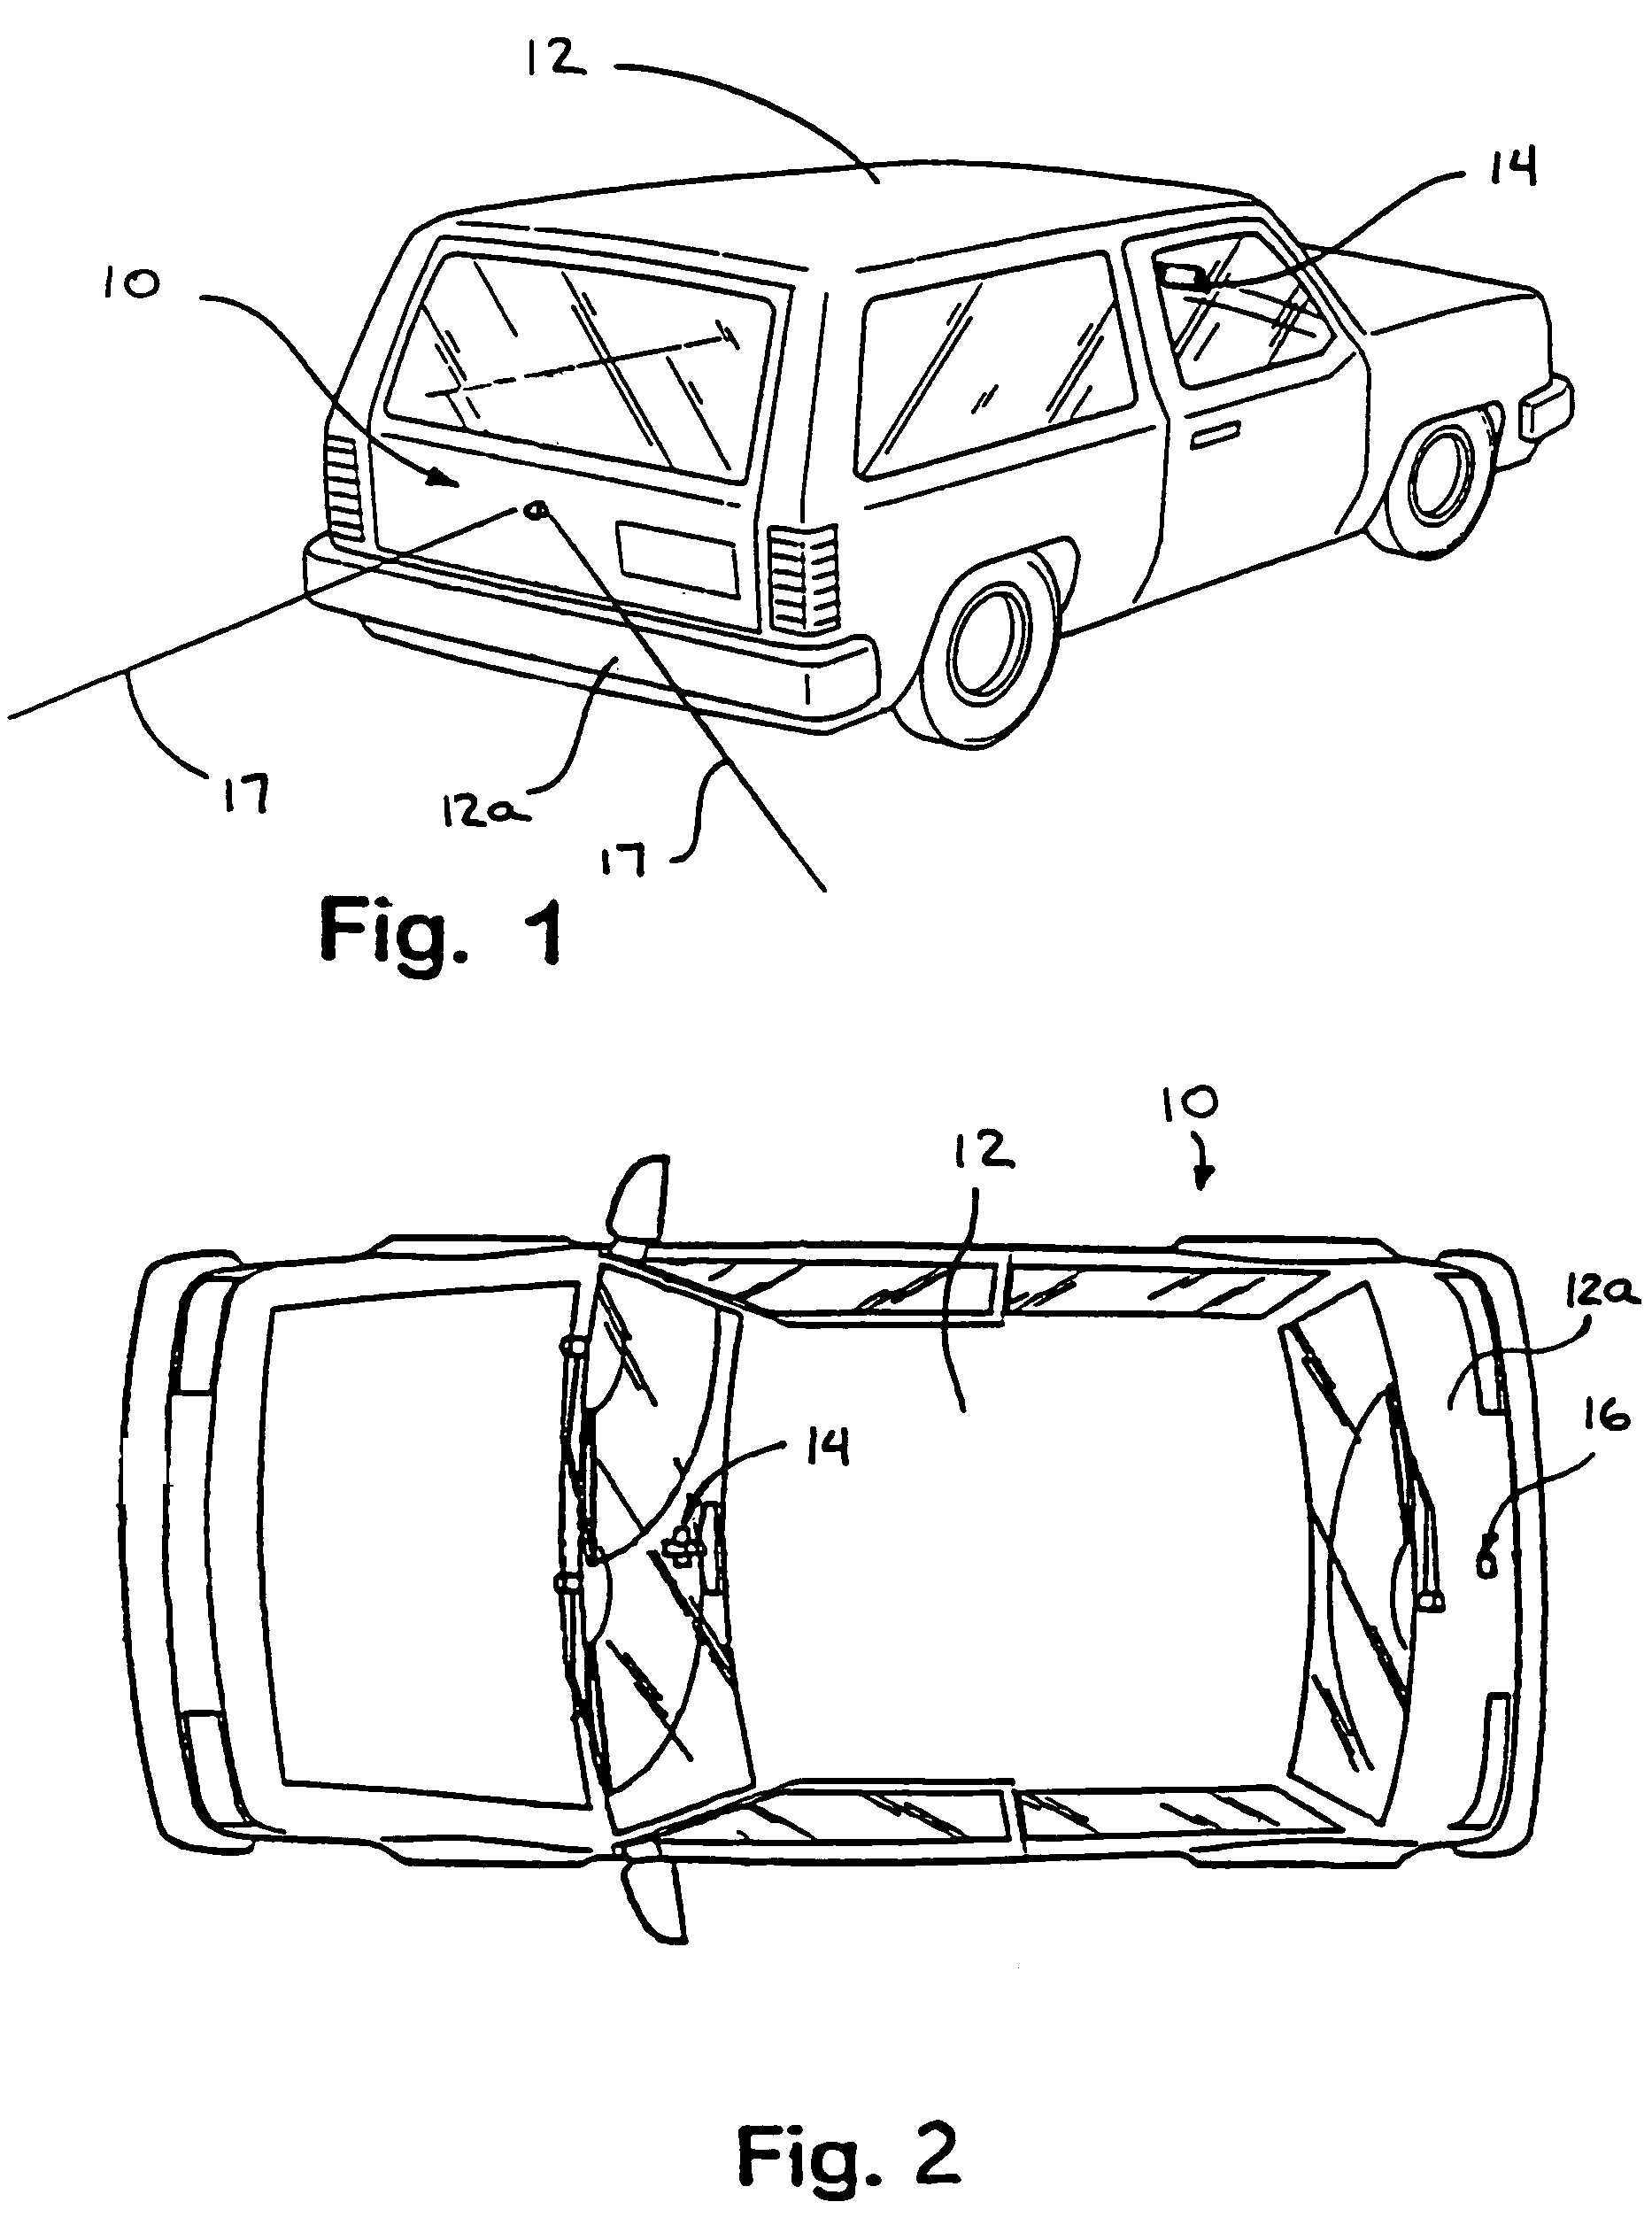 Vision system for vehicle